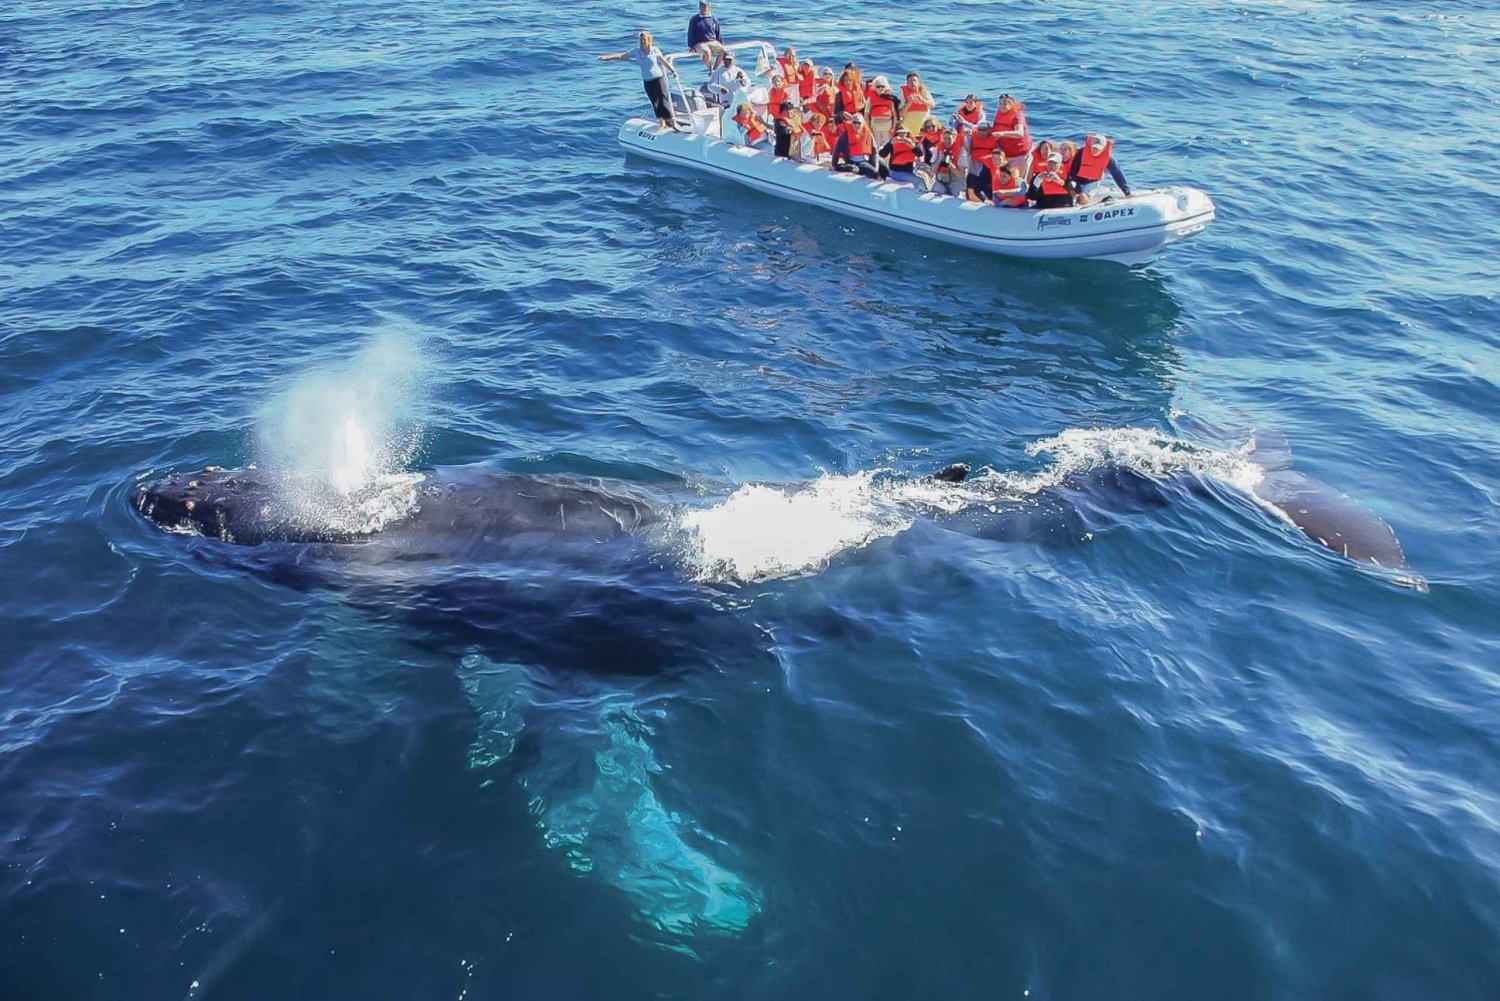 Cabo San Lucas: 2-Hour Whale Watching Adventure